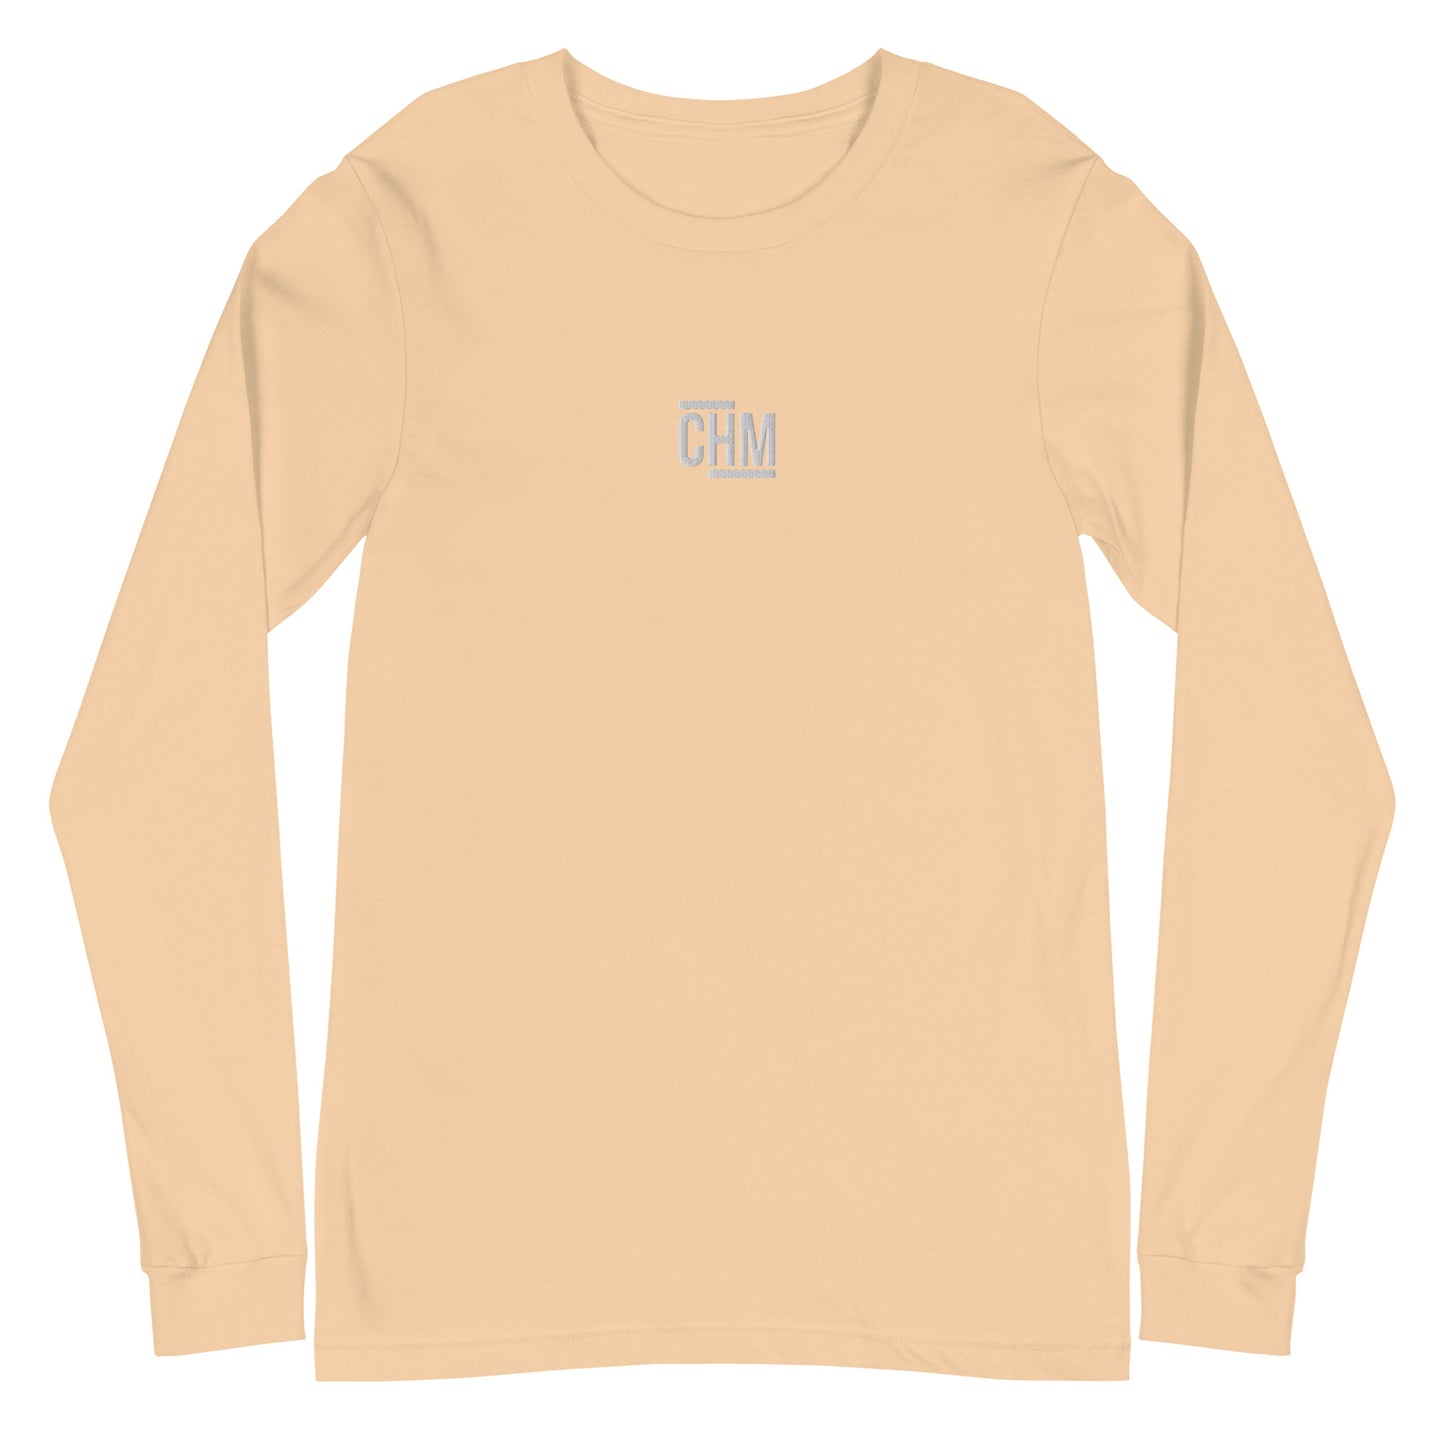 CARING HEARTS EMBROIDERED INITIALS LOGO LONG SLEEVE T-SHIRT (MORE COLORS)